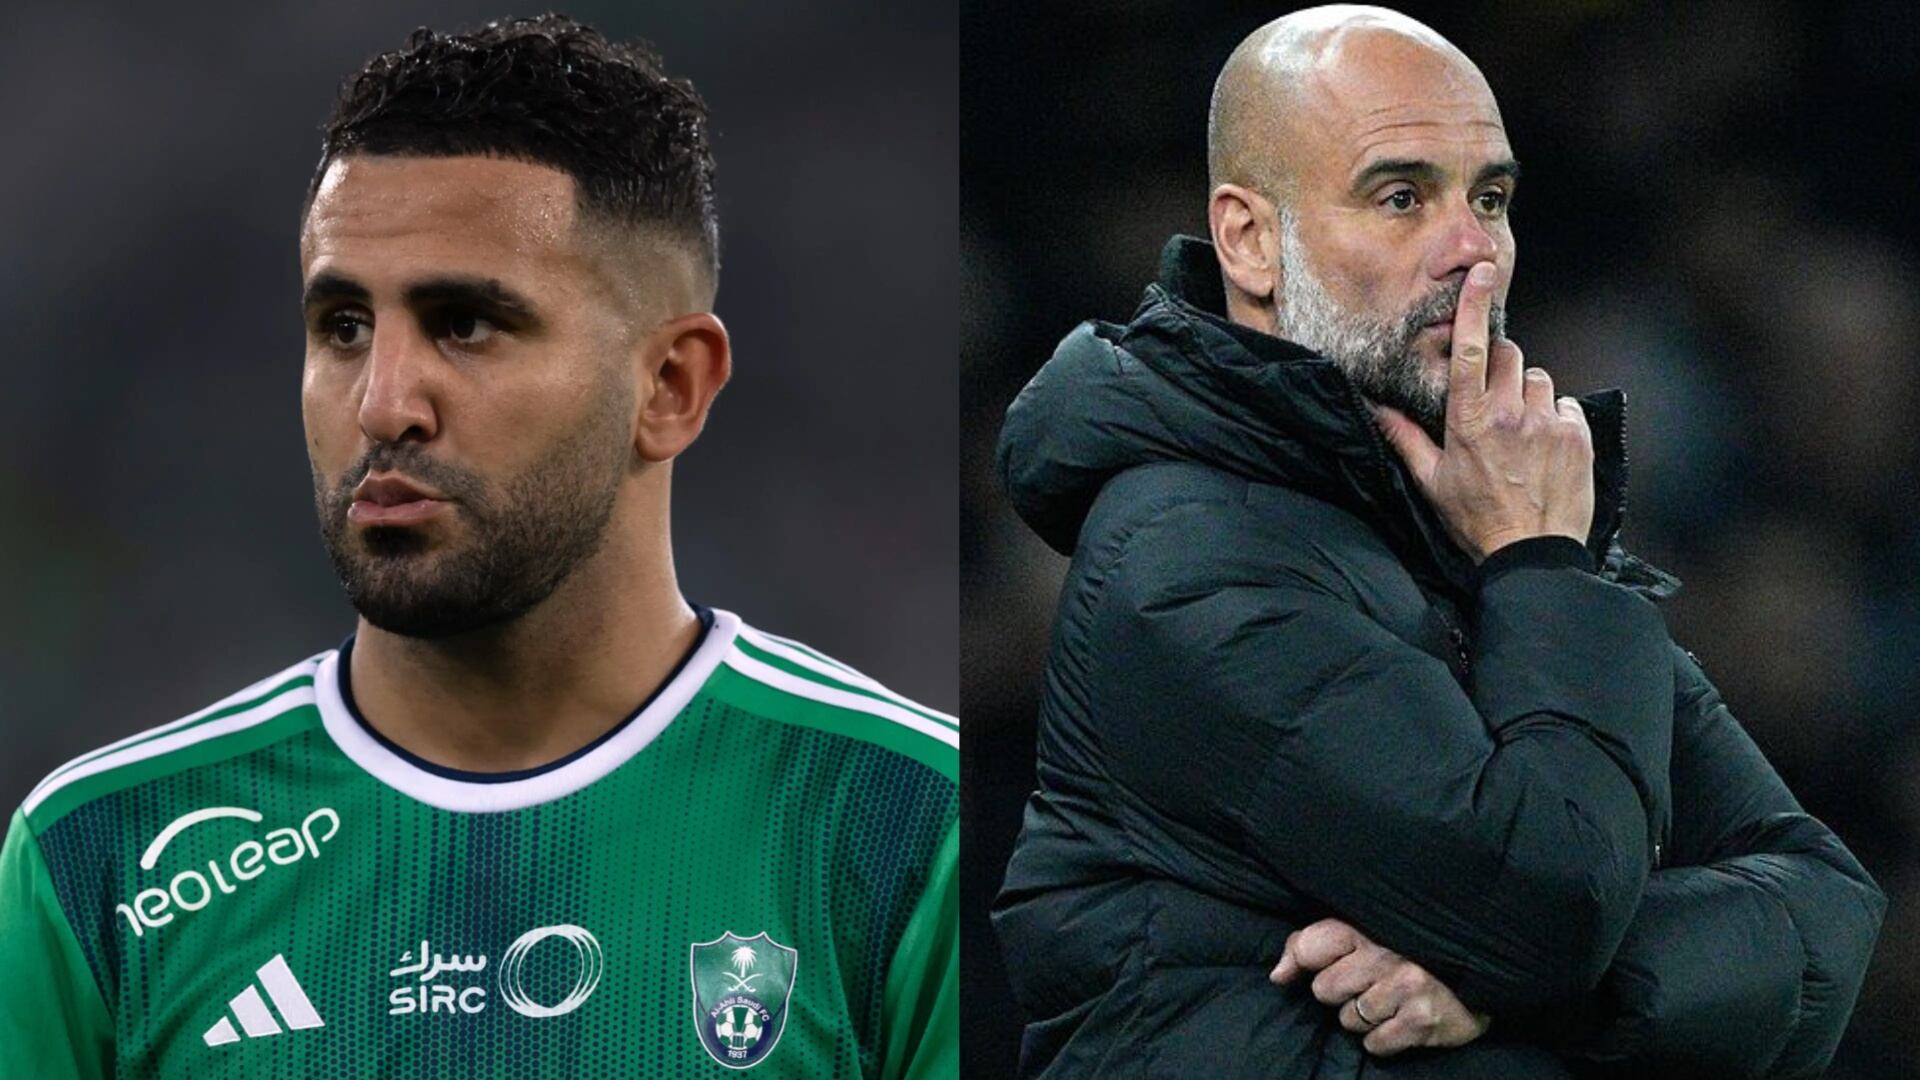 New Mahrez? Pep Guardiola interested in bringing 30M winger for Manchester City 